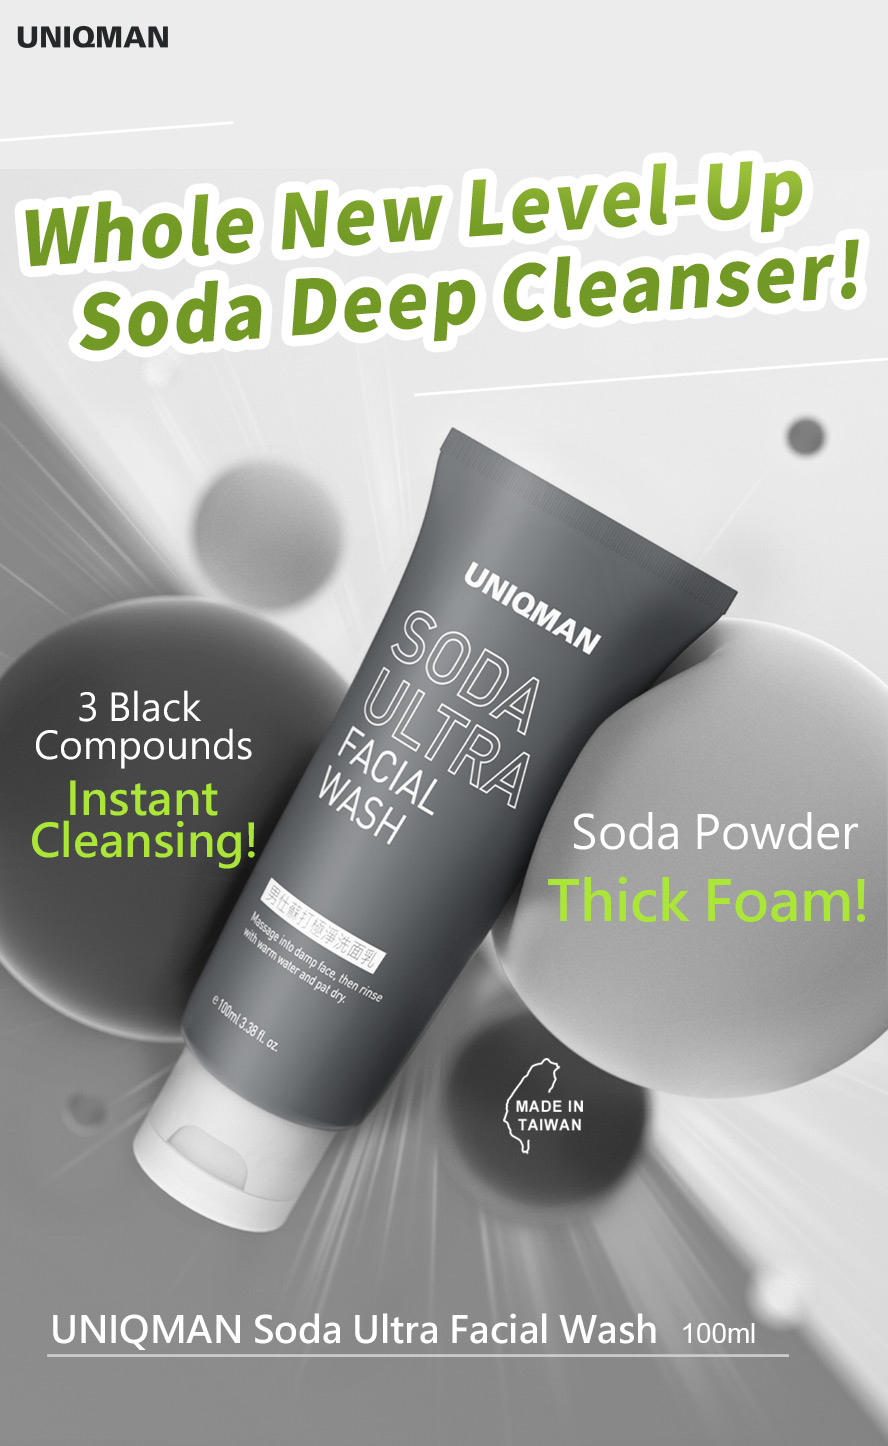 UNIQMAN Soda Ultra Wash has 3 ultimate black compounds to promote instant deep pore cleansing and exofliate excess oil and dirt, added with soda powder for thick foam. 